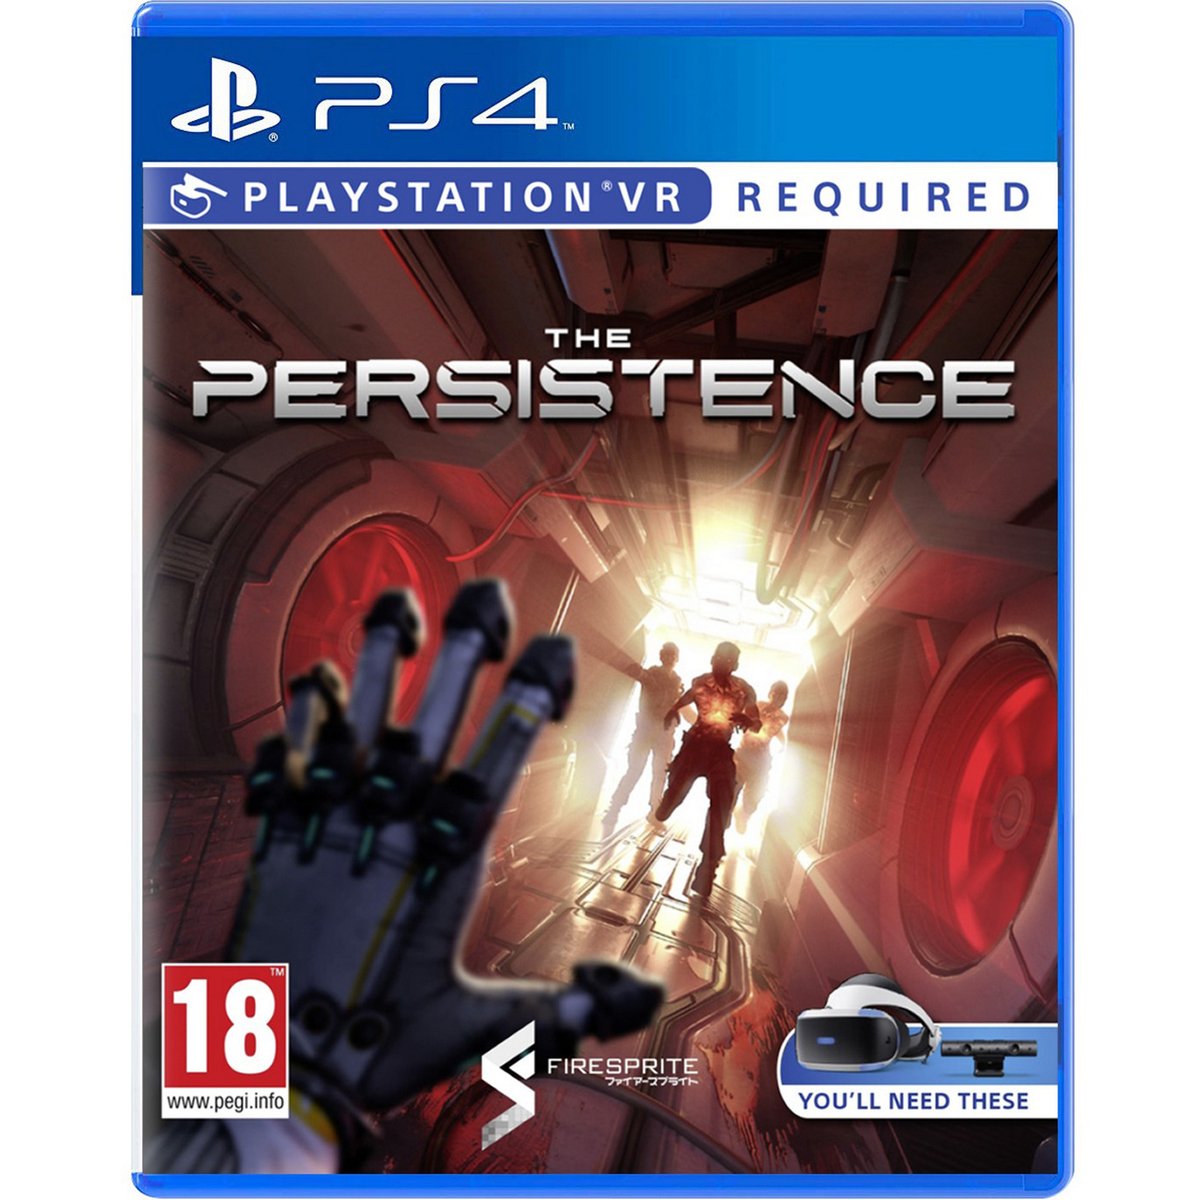 PS4 VR The Persistence